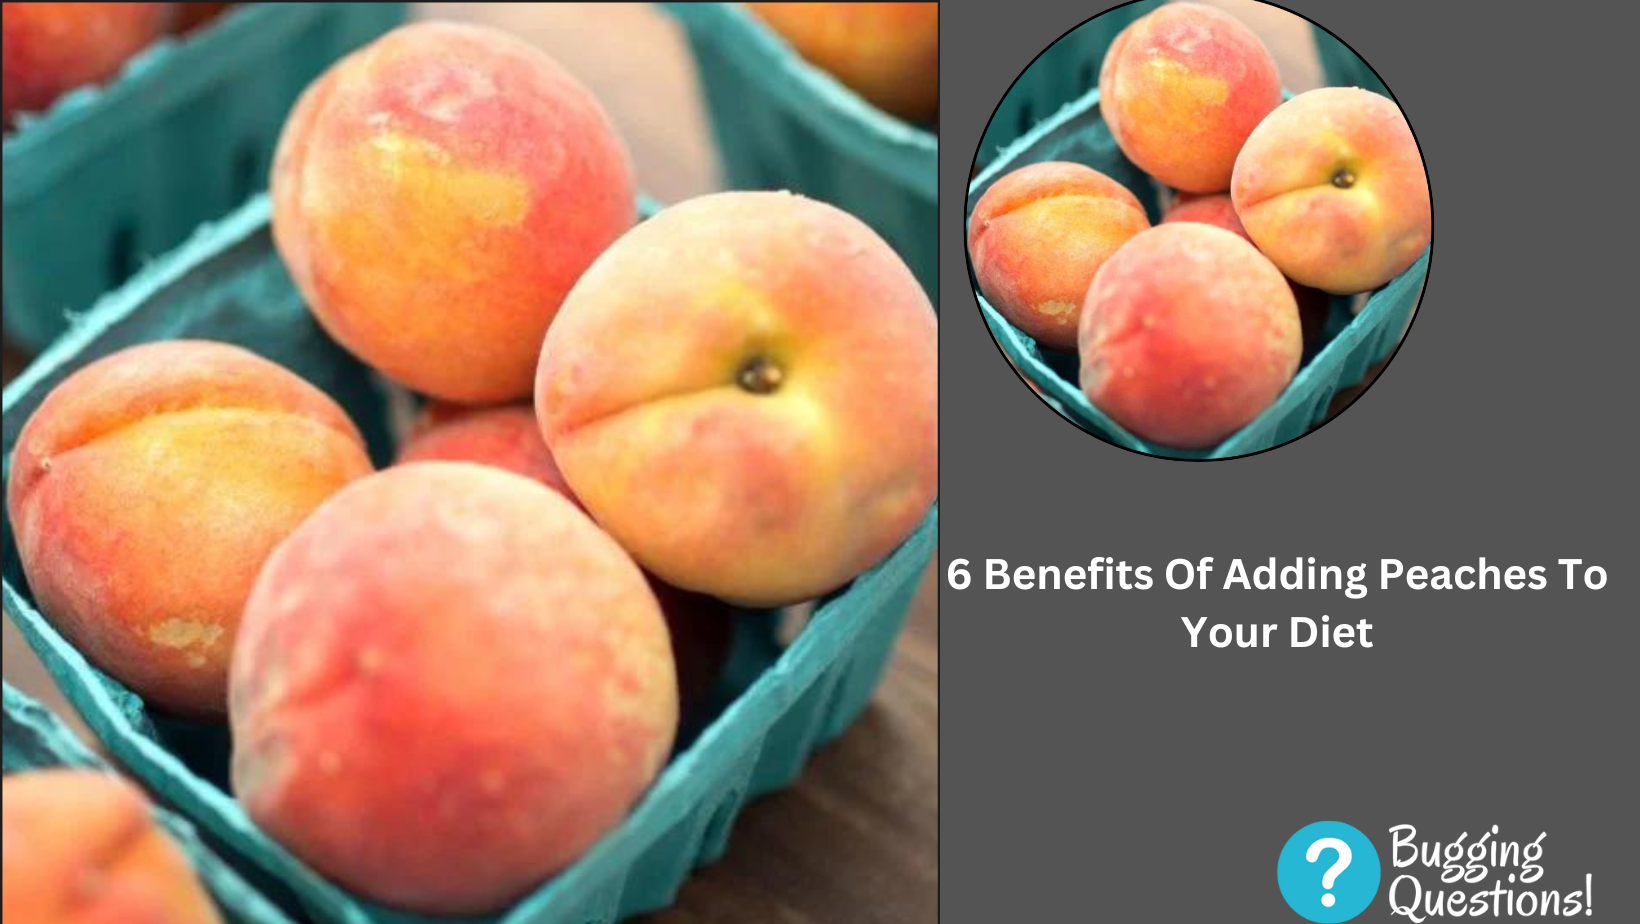 Benefits Of Adding Peaches To Your Diet